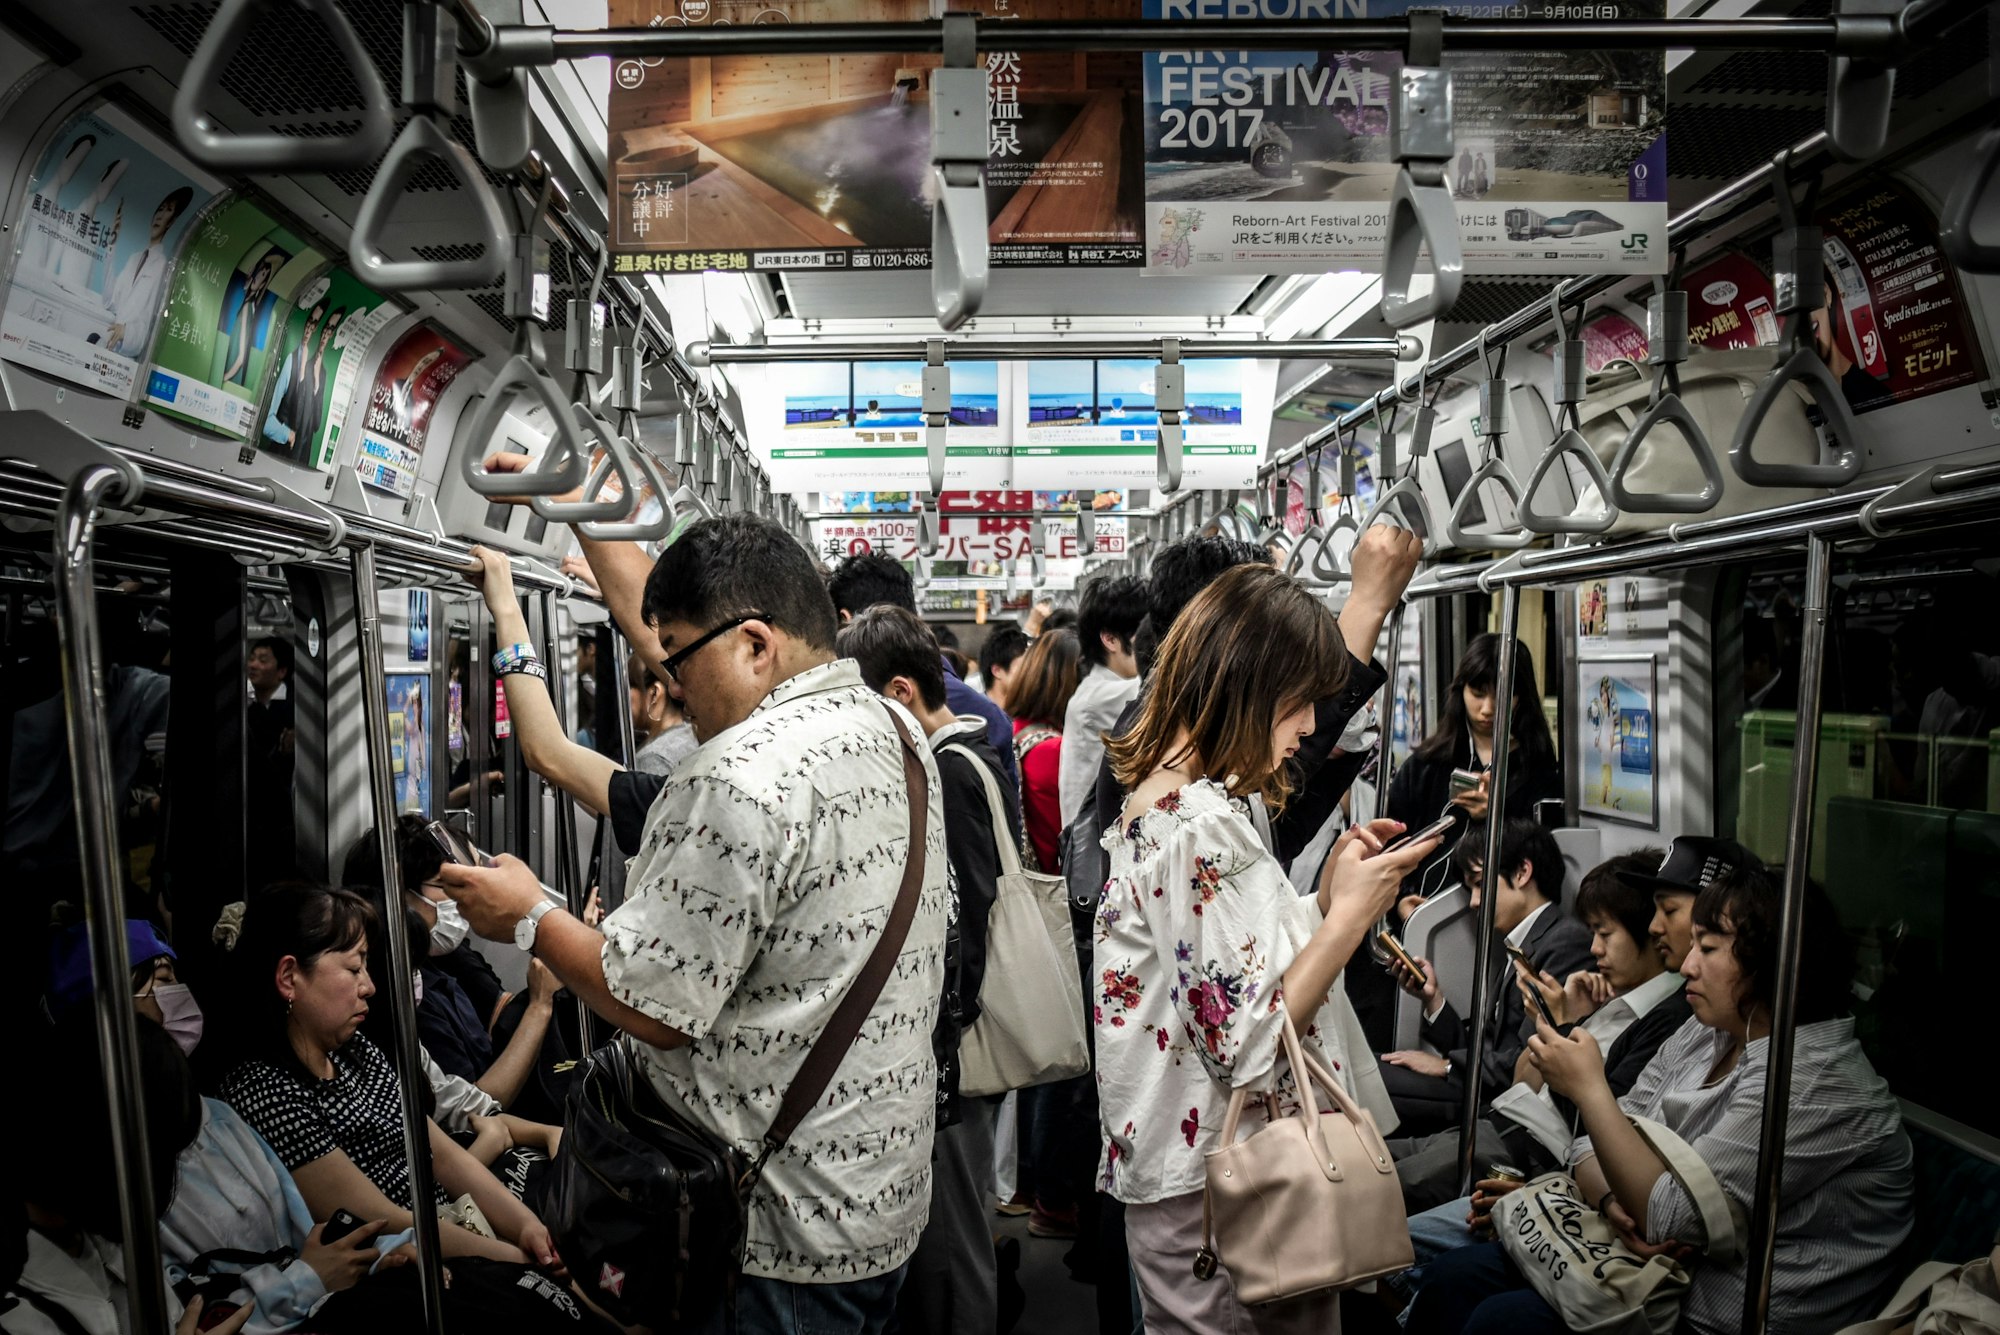 During an overnight layover in Tokyo, I decided to take the train to Shibuya to explore the area and eat some ramen. On the way back, I noticed that almost everyone one the train was anti-social and focused on their mobile devices. I took a photograph documenting this.